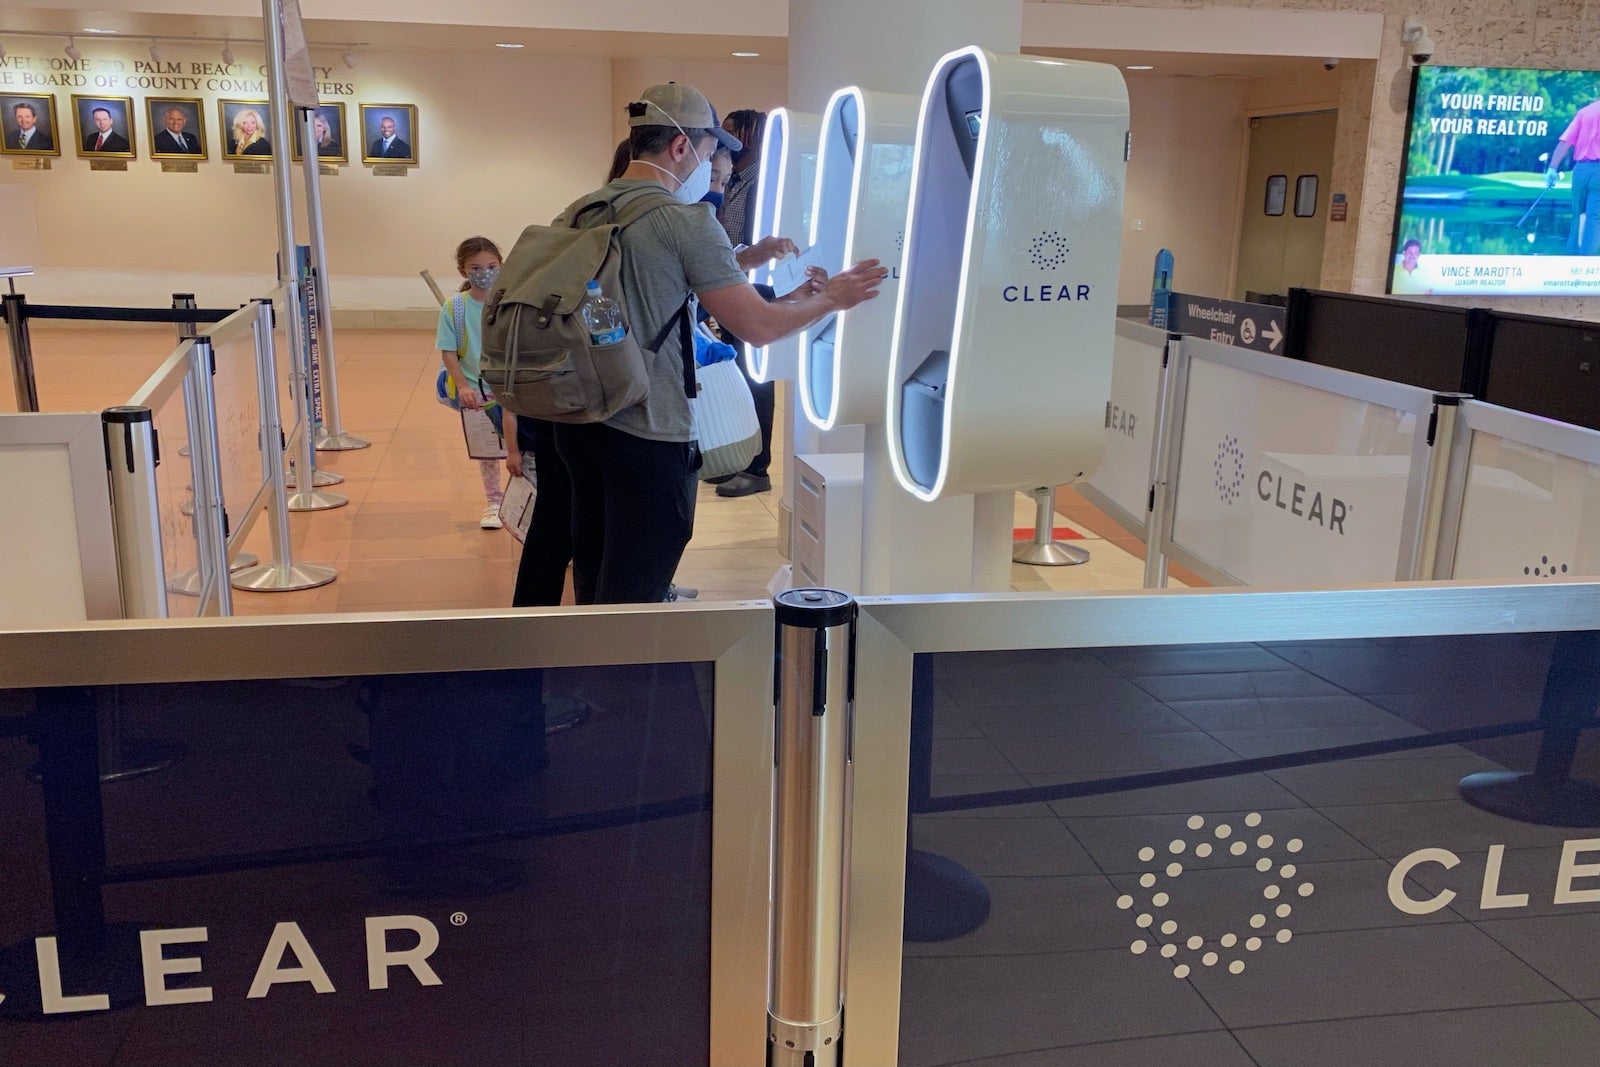 travelers approach Clear kiosks at an airport